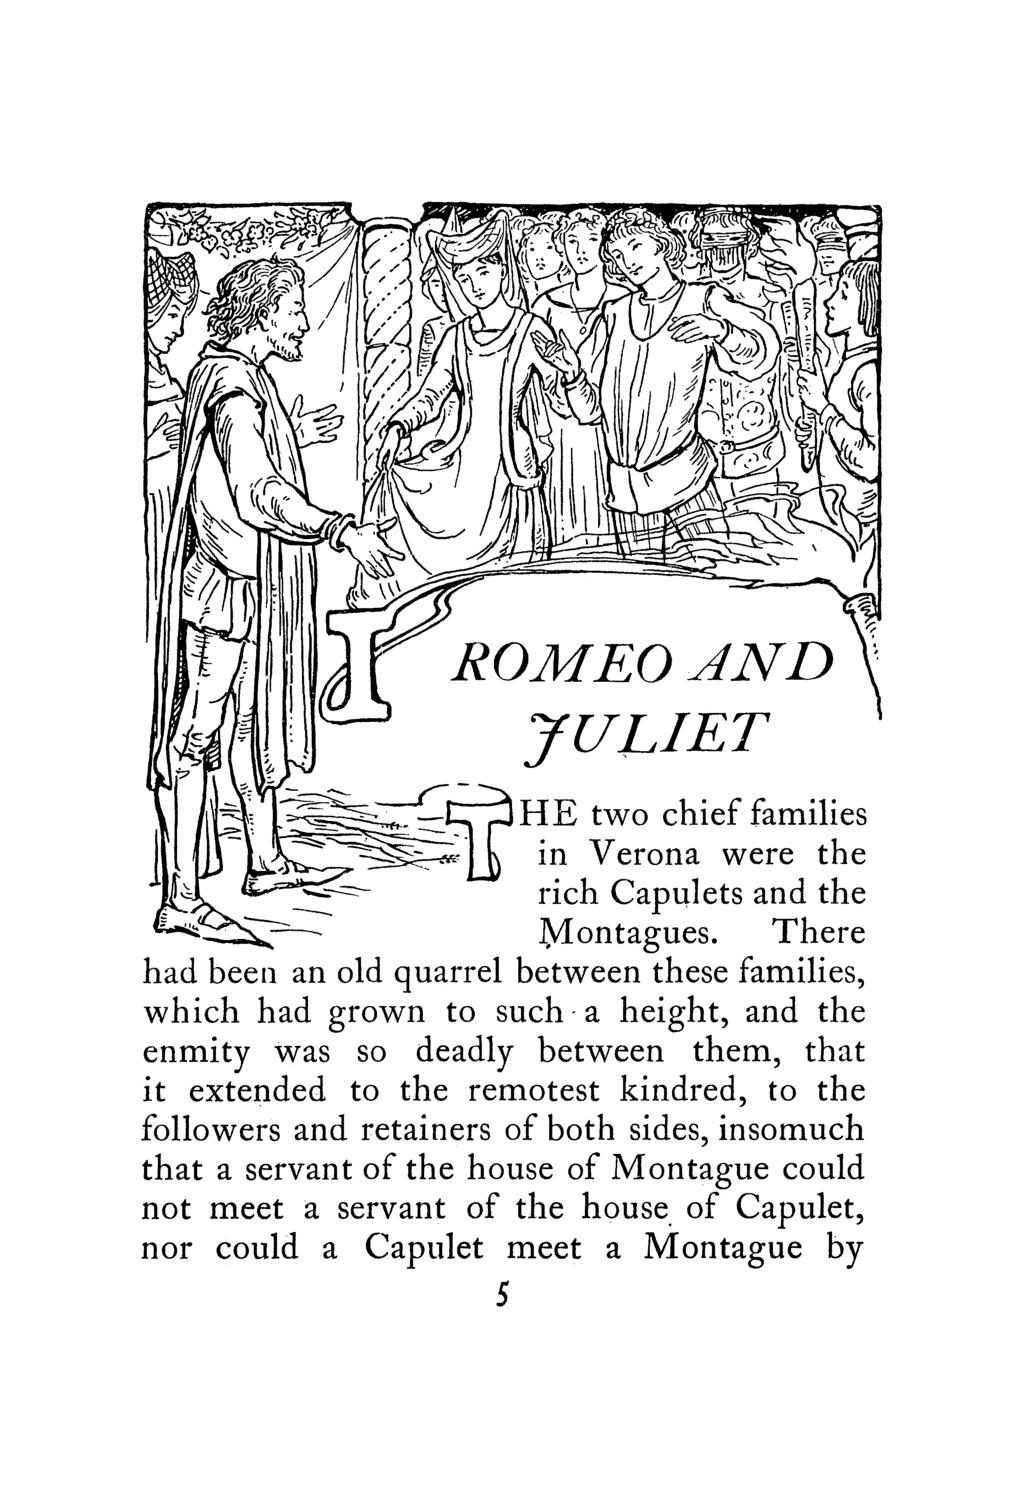 ROMEO AND JULIET THE two chief families in Verona were the rich Capulets and the Montagues.